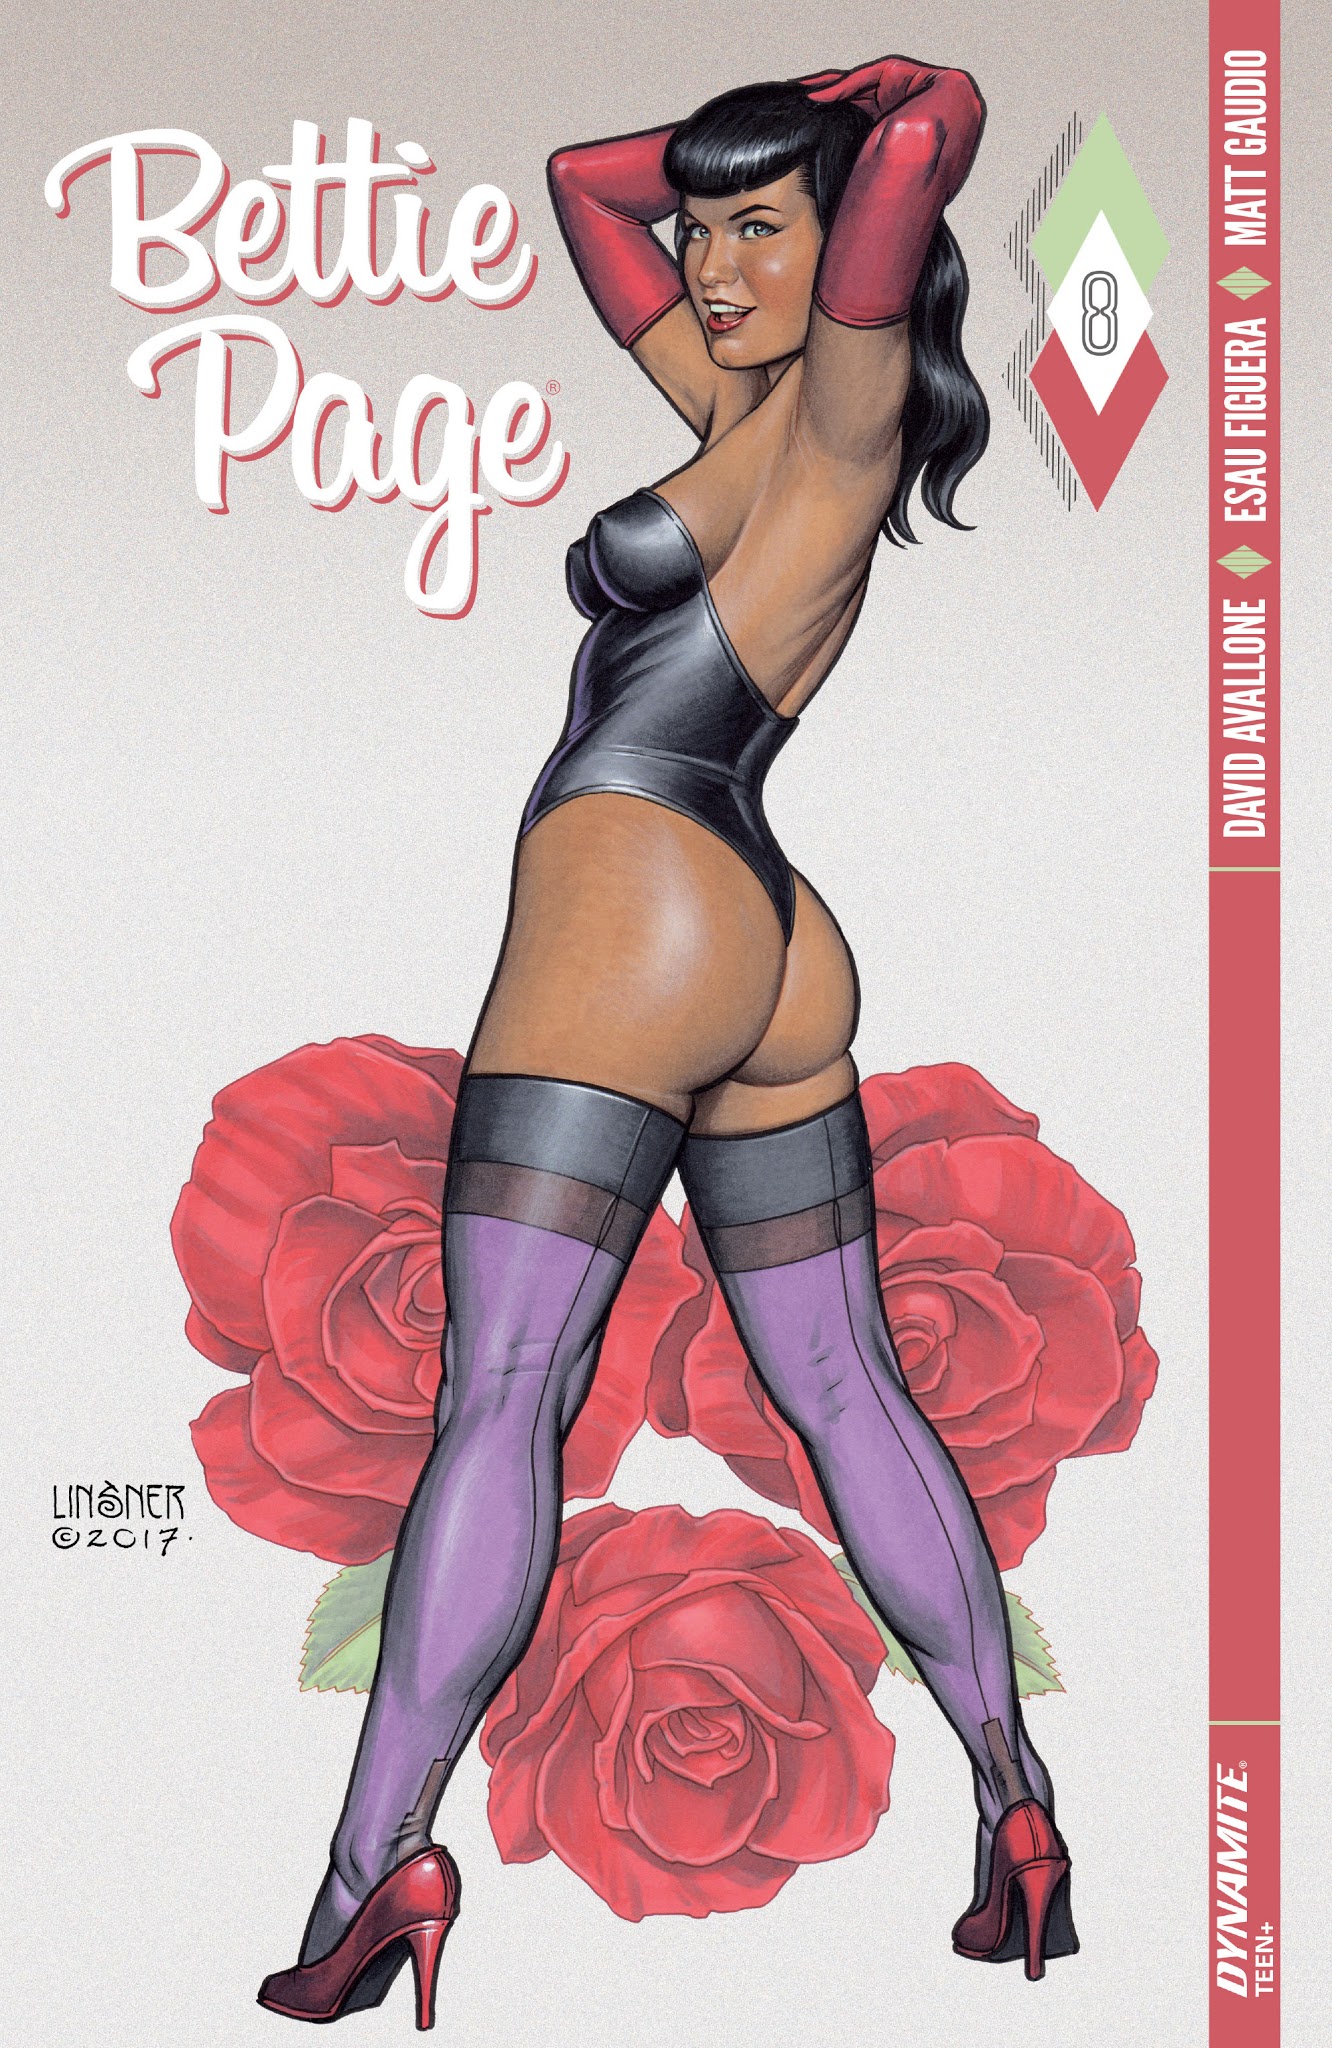 Read online Bettie Page comic -  Issue #8 - 1